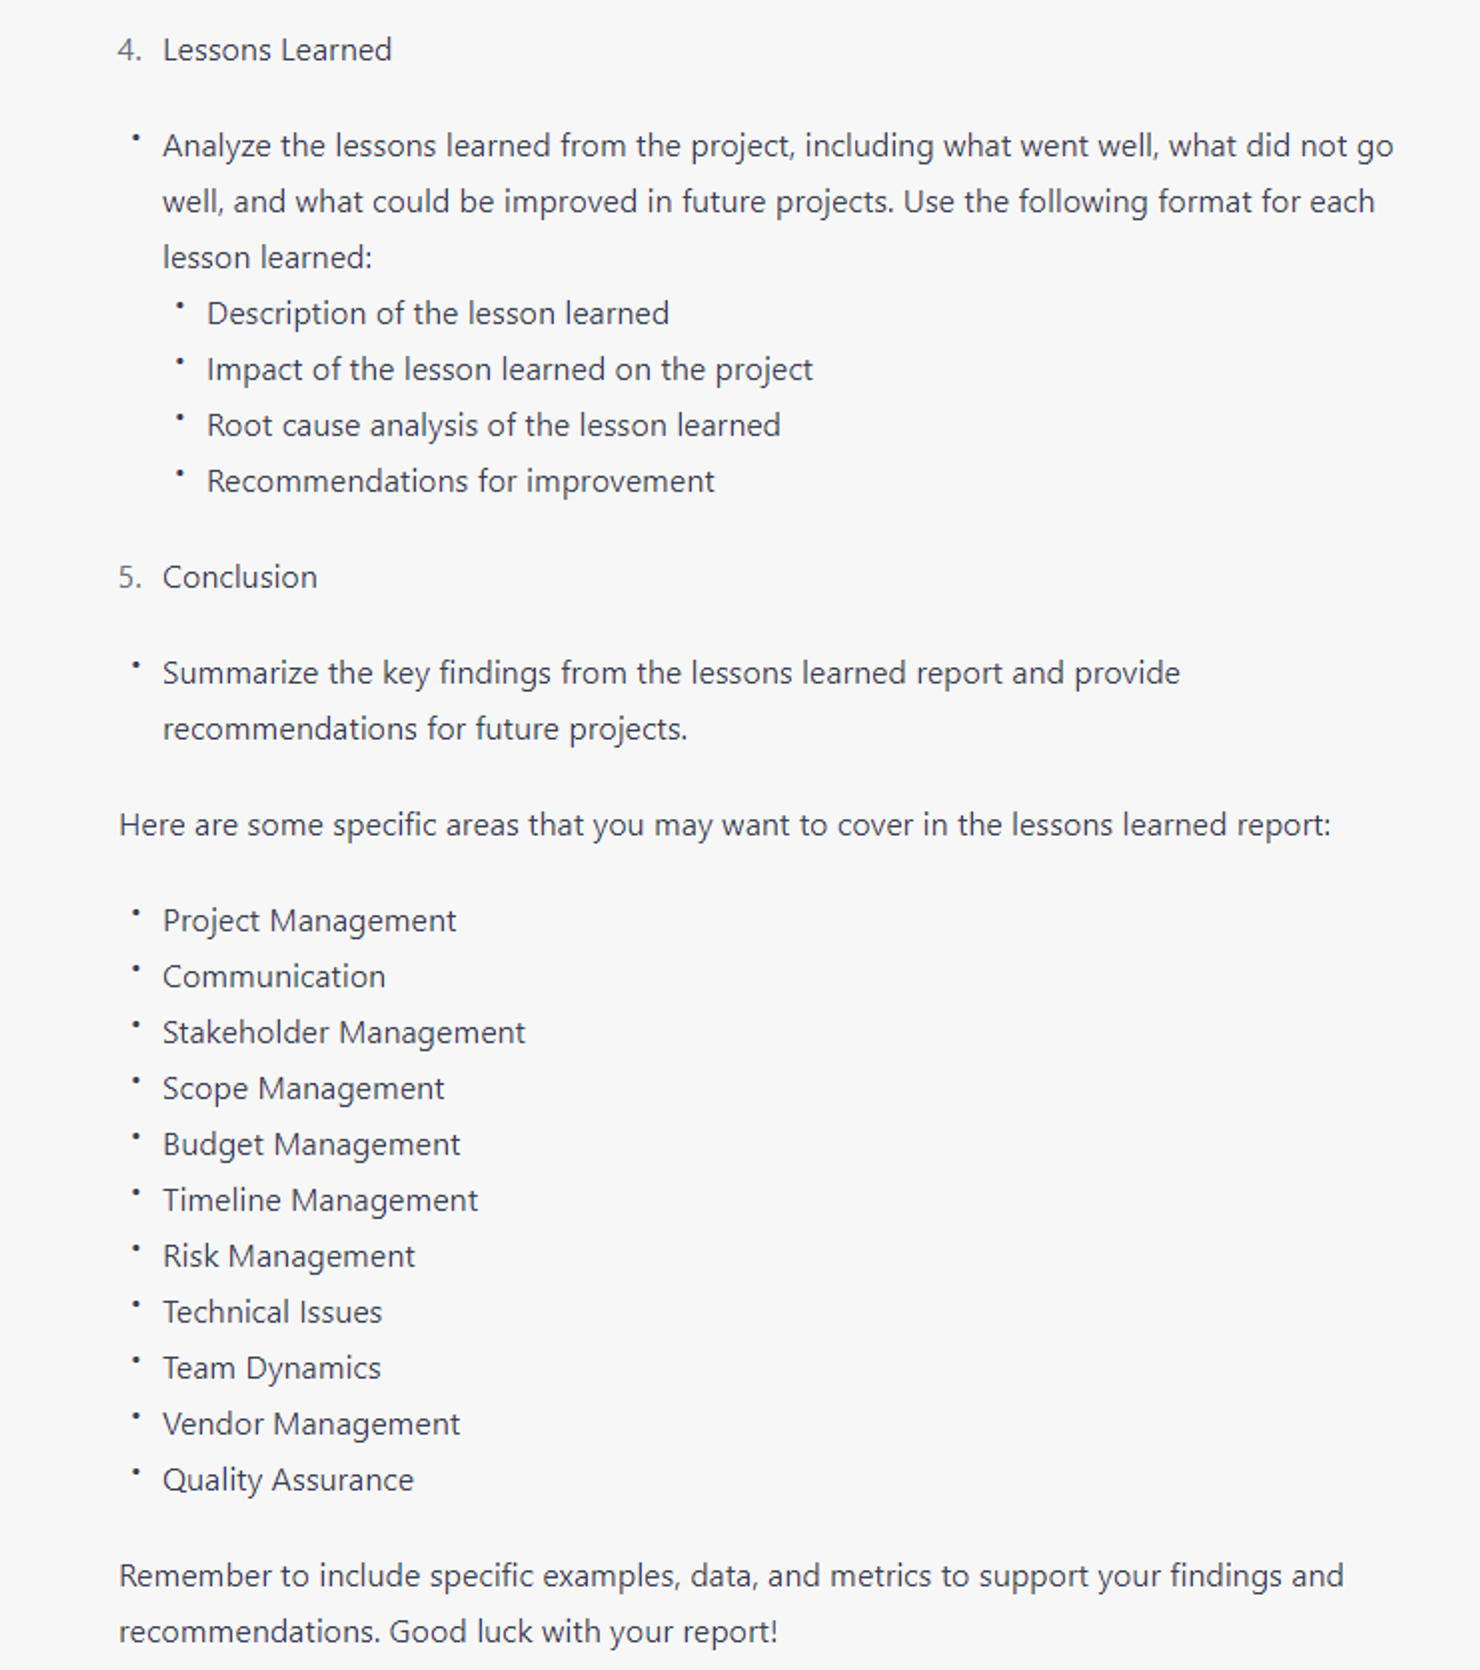  7 Strategic ChatGPT Prompts: Create project lessons learned report